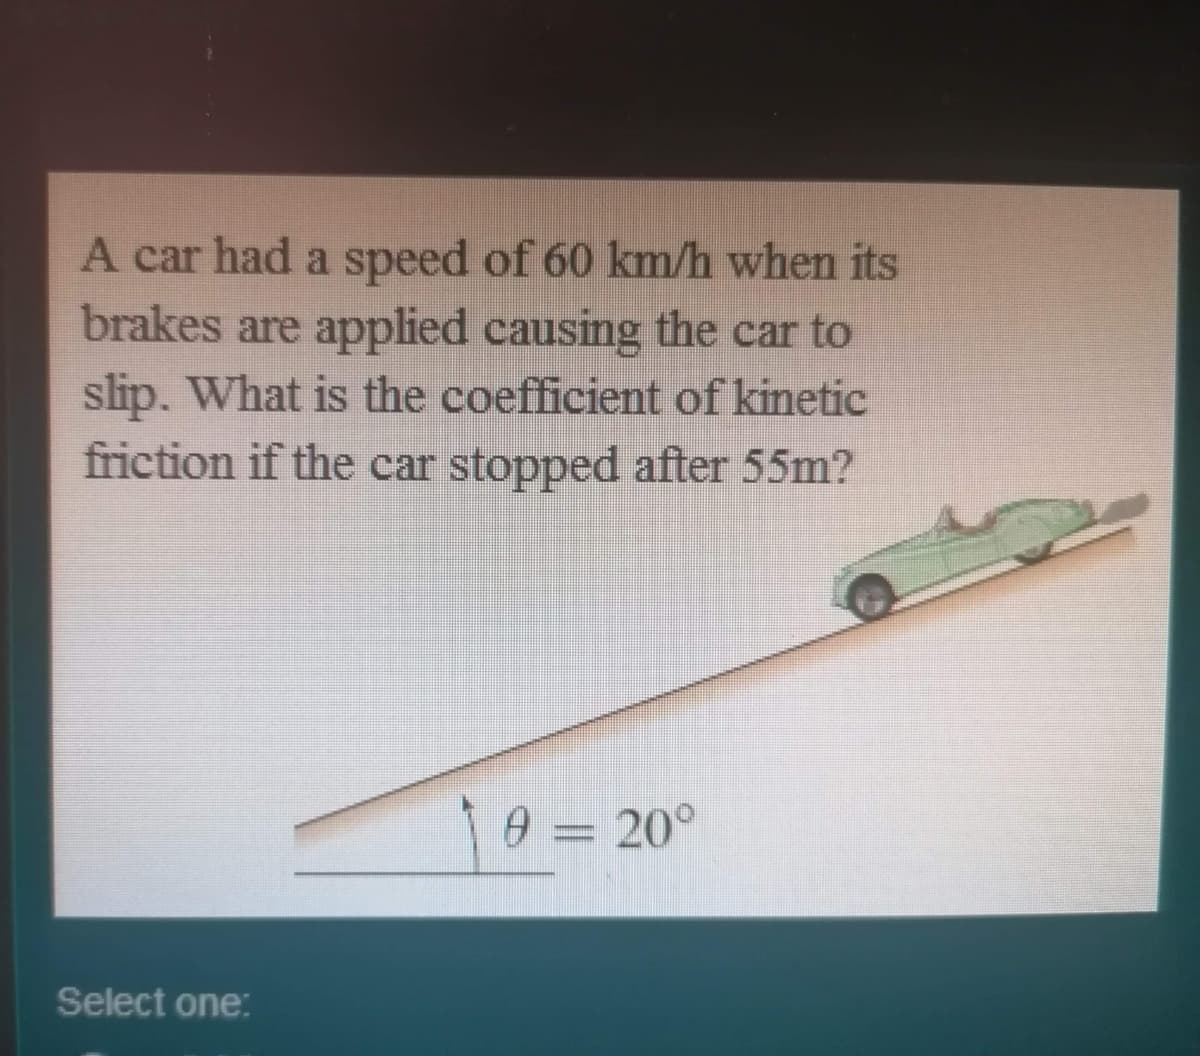 A car had a speed of 60 km/h when its
brakes are applied causing the car to
slip. What is the coefficient of kinetic
friction if the car stopped after 55m?
0 = 20°
Select one:
